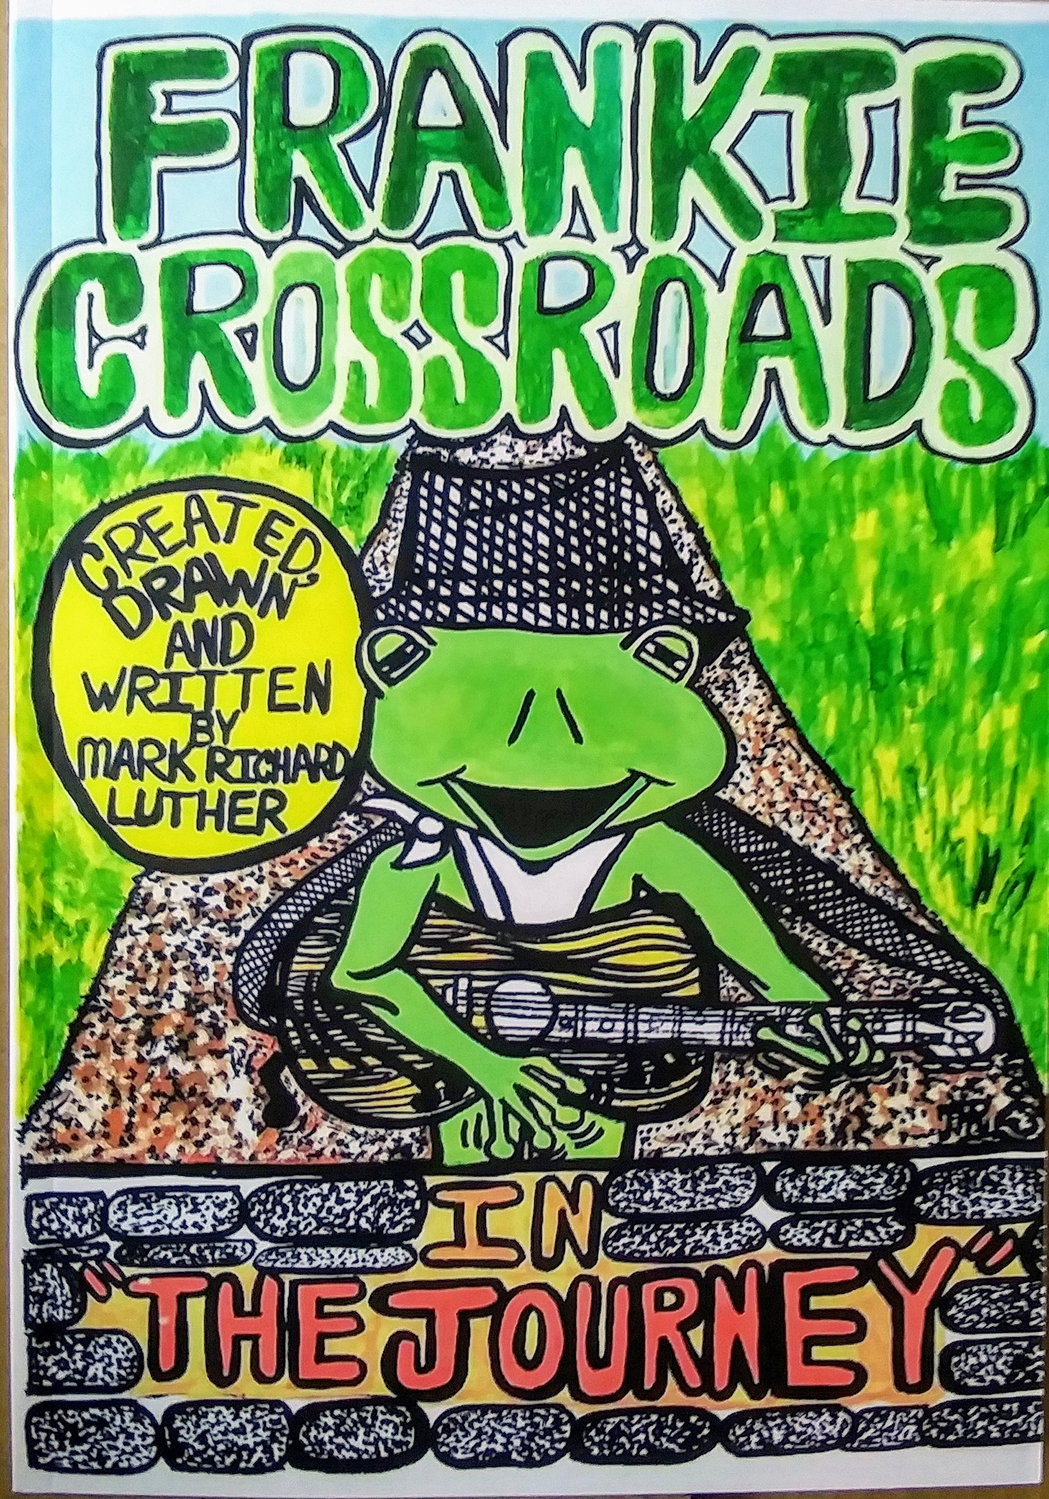 FRANKIE CROSSROAD’S JOURNEY — Local artist and writer Mark Luther has published his first graphic novel and is already writing its sequel. Frankie Crossroads — The Journey can be purchased through a number of online retailers.